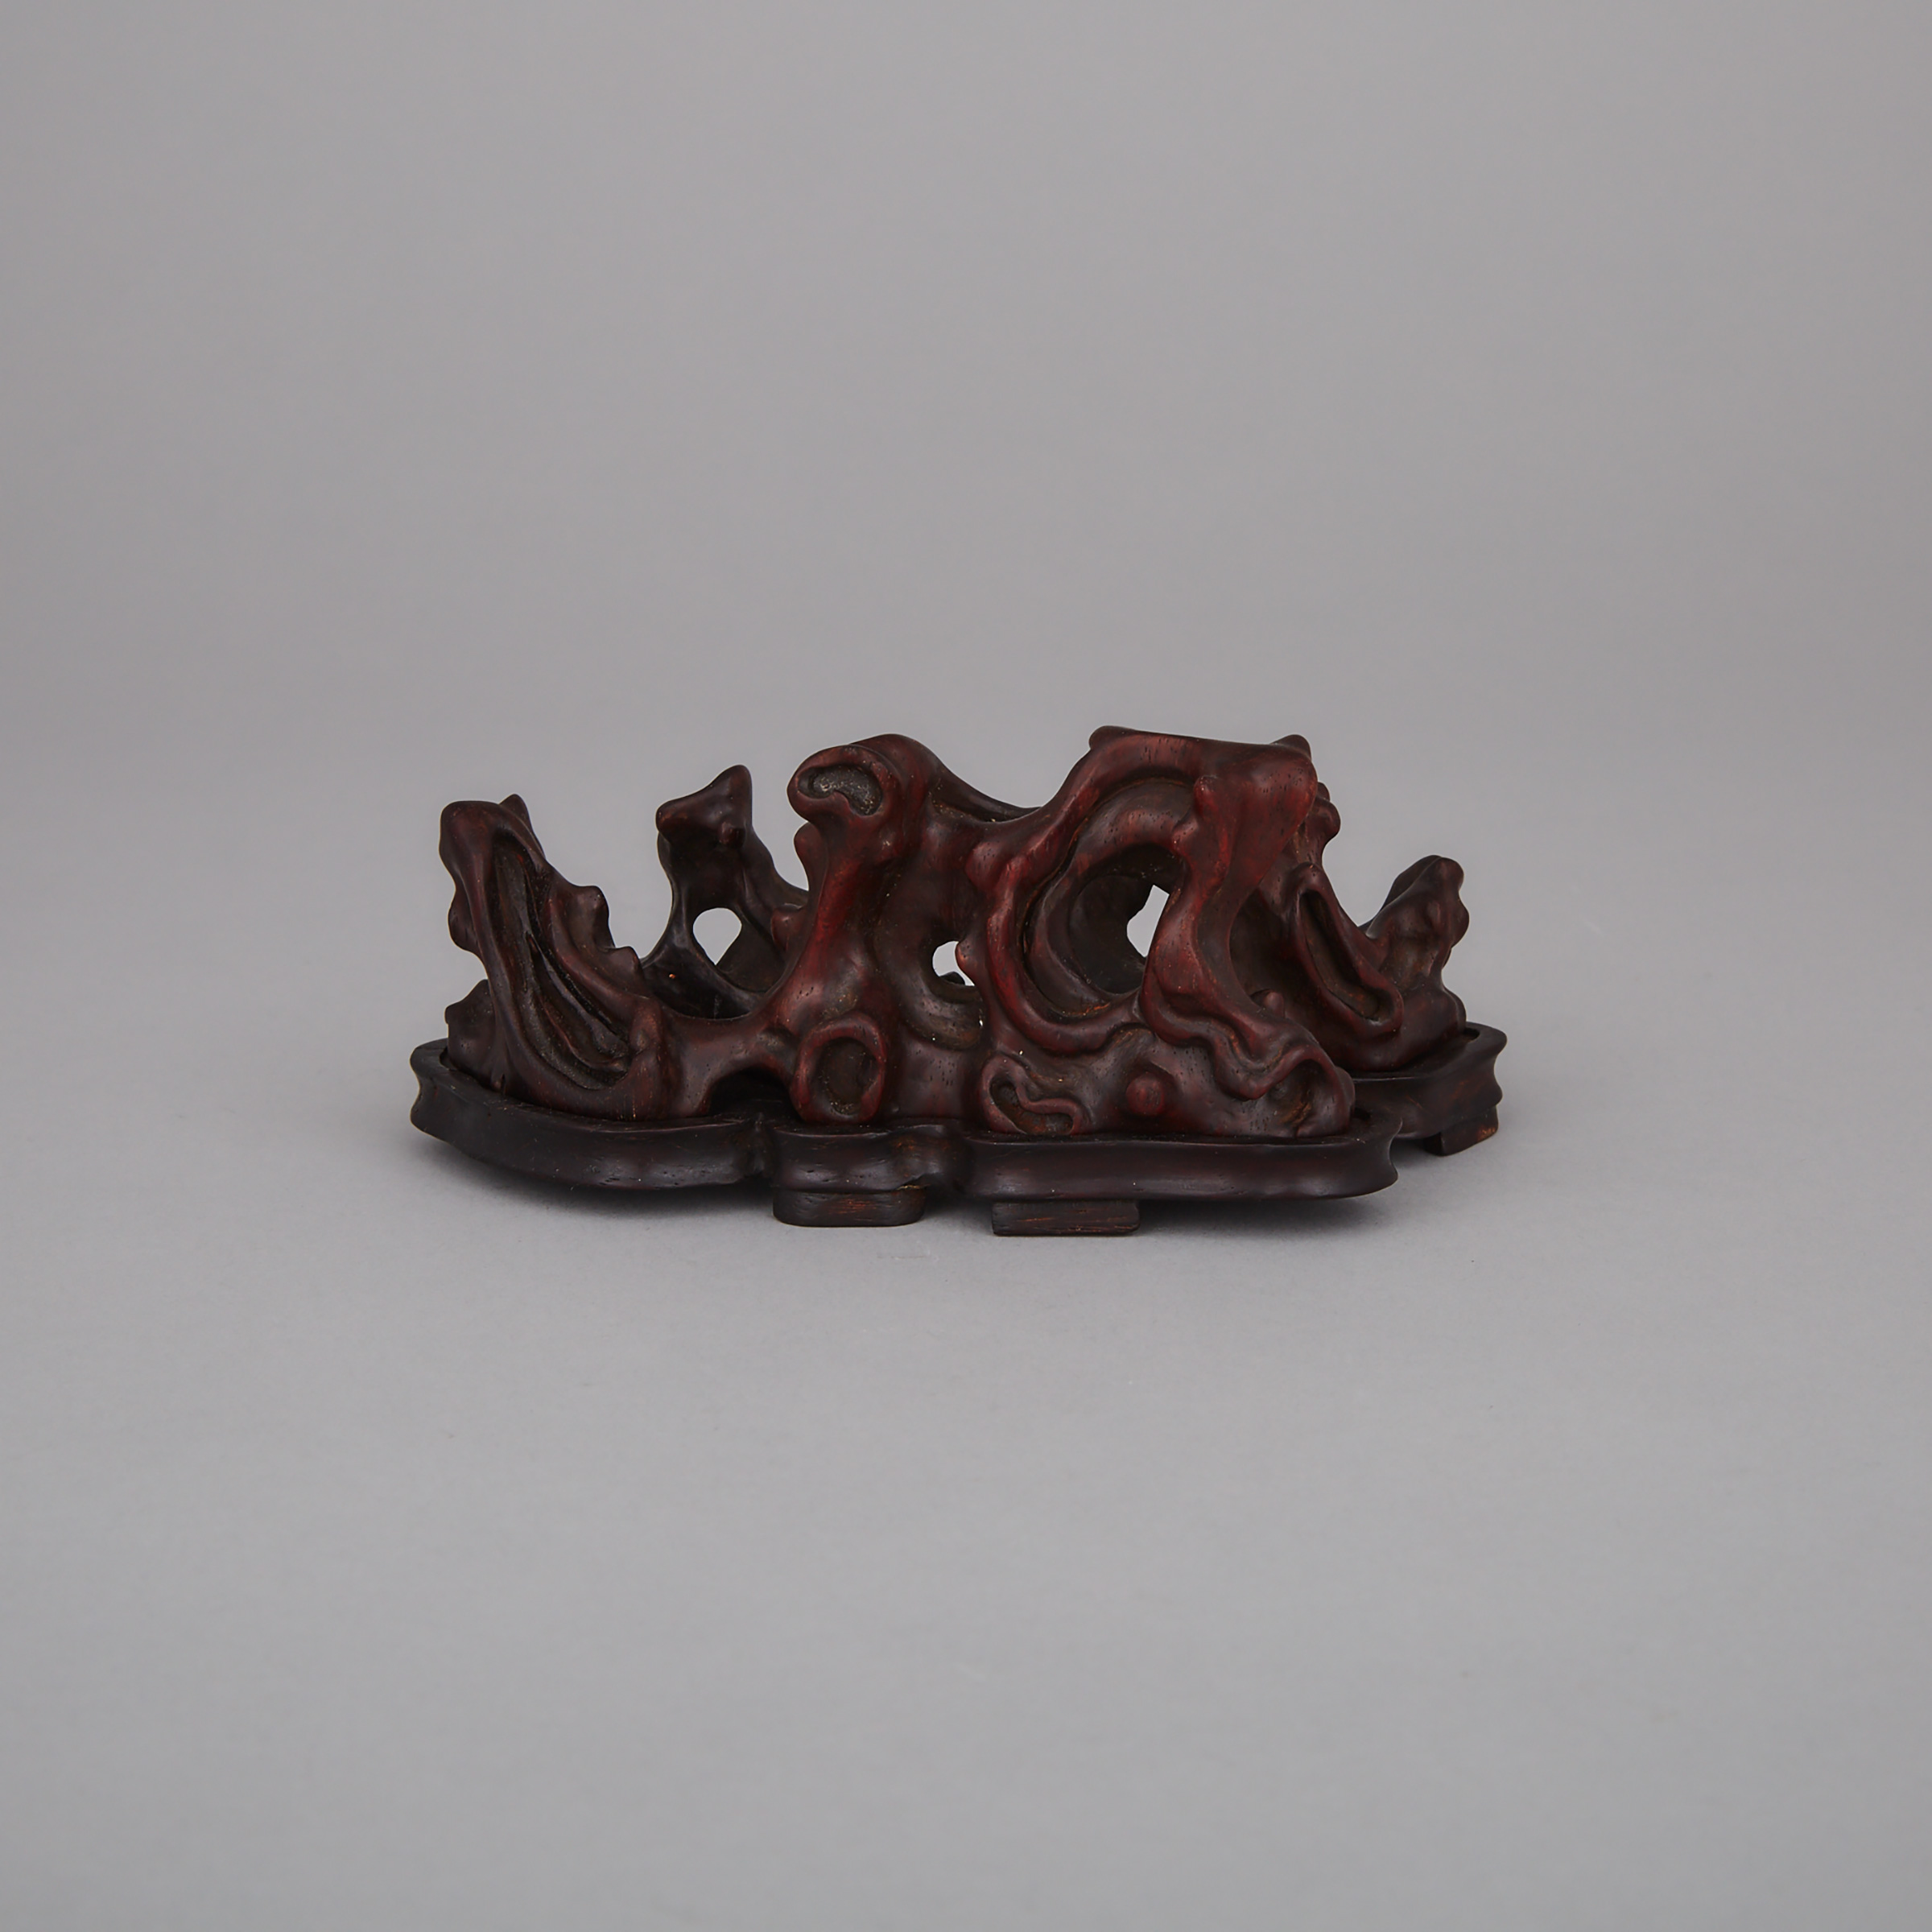 A Reticulated Zitan Scholar Carving with Stand, Qing Dynasty